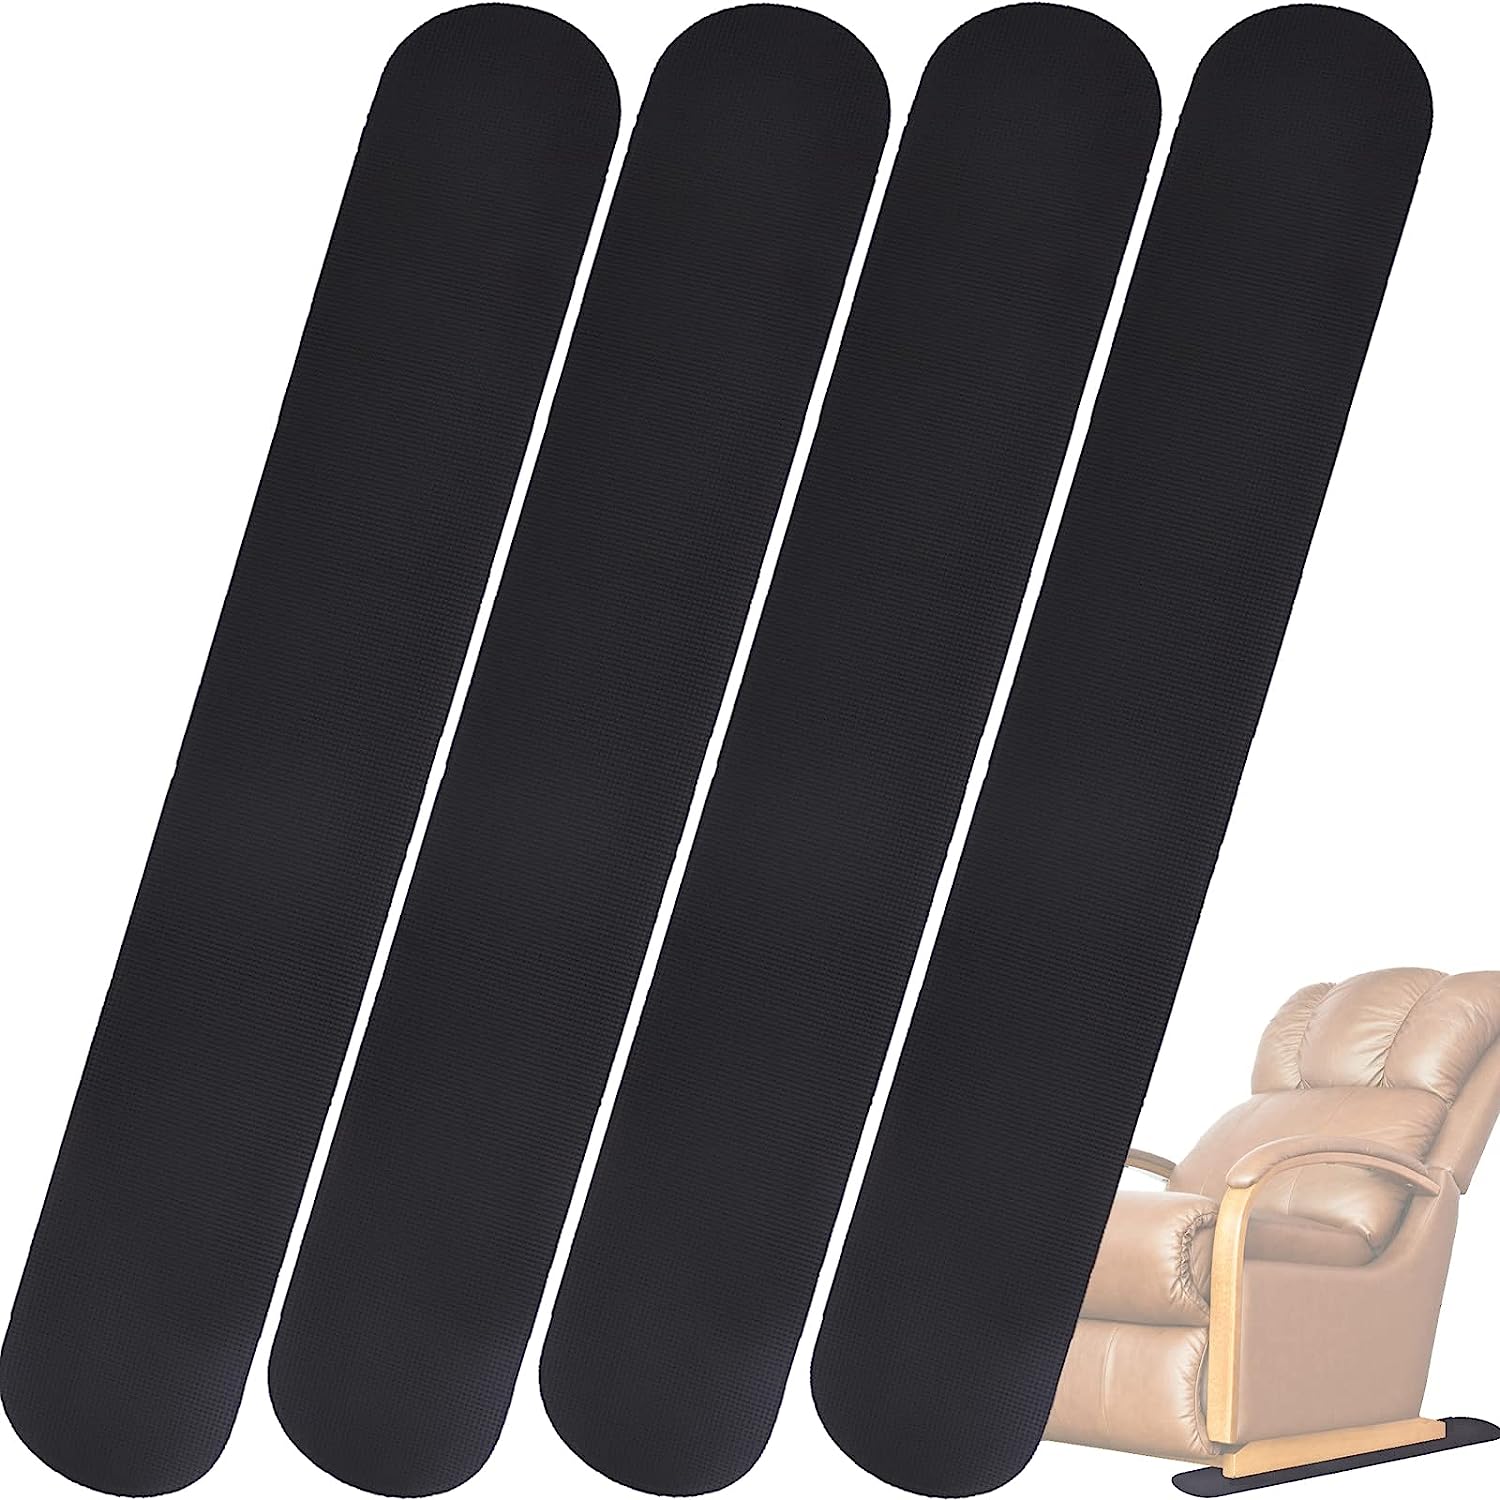 4 Pack Anti-Slip Furniture Rail Pads for Recliner for [...]